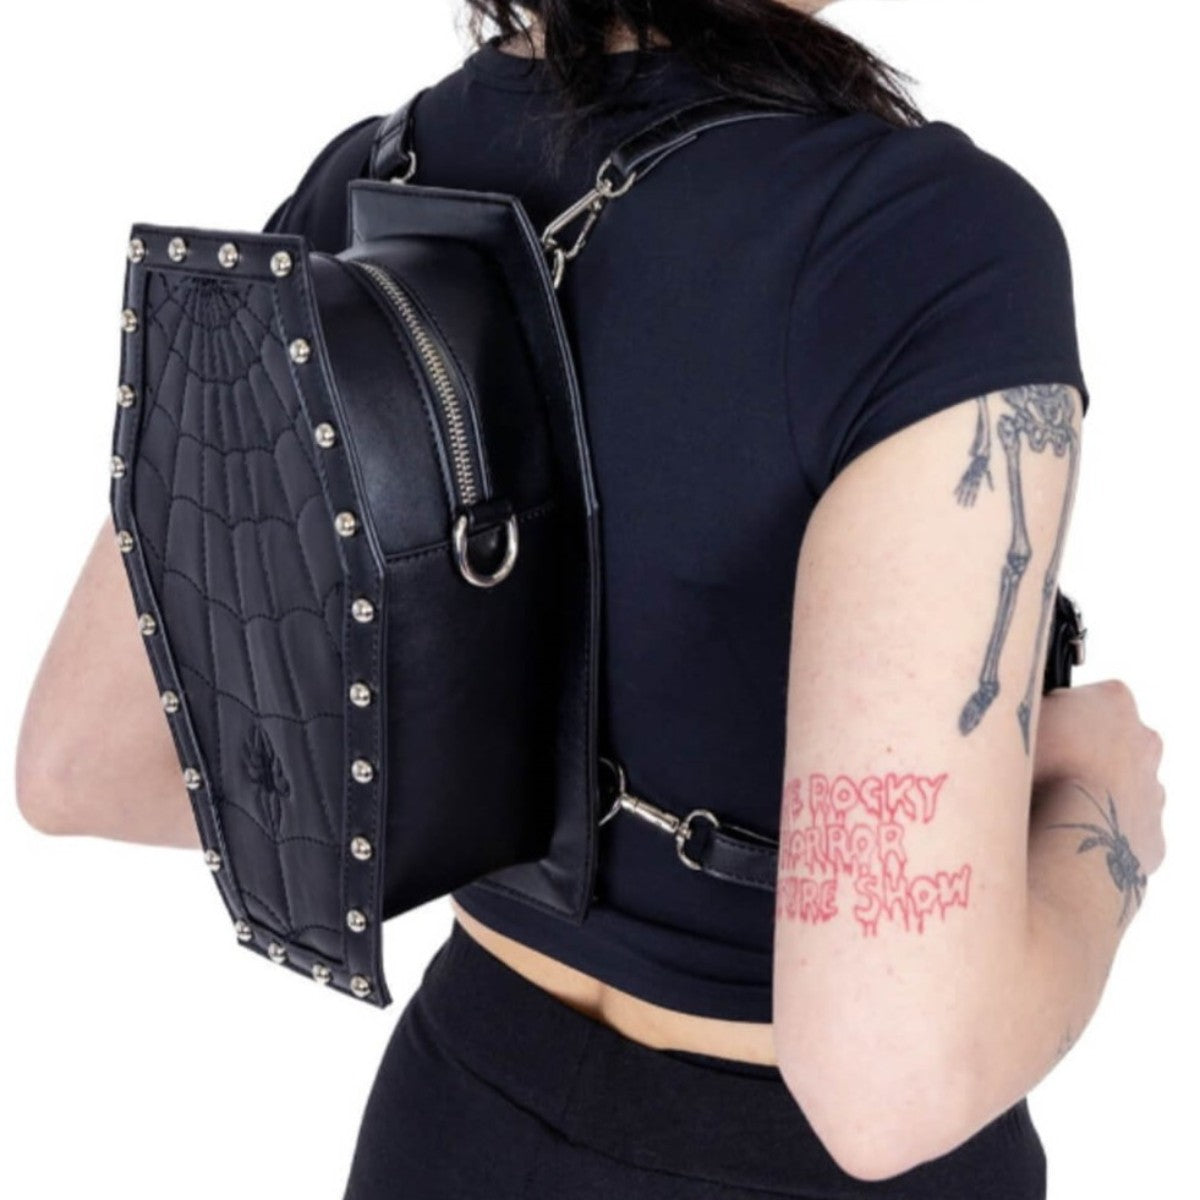 Heartless Web Weaver Spiderweb Gothic Coffin Backpack